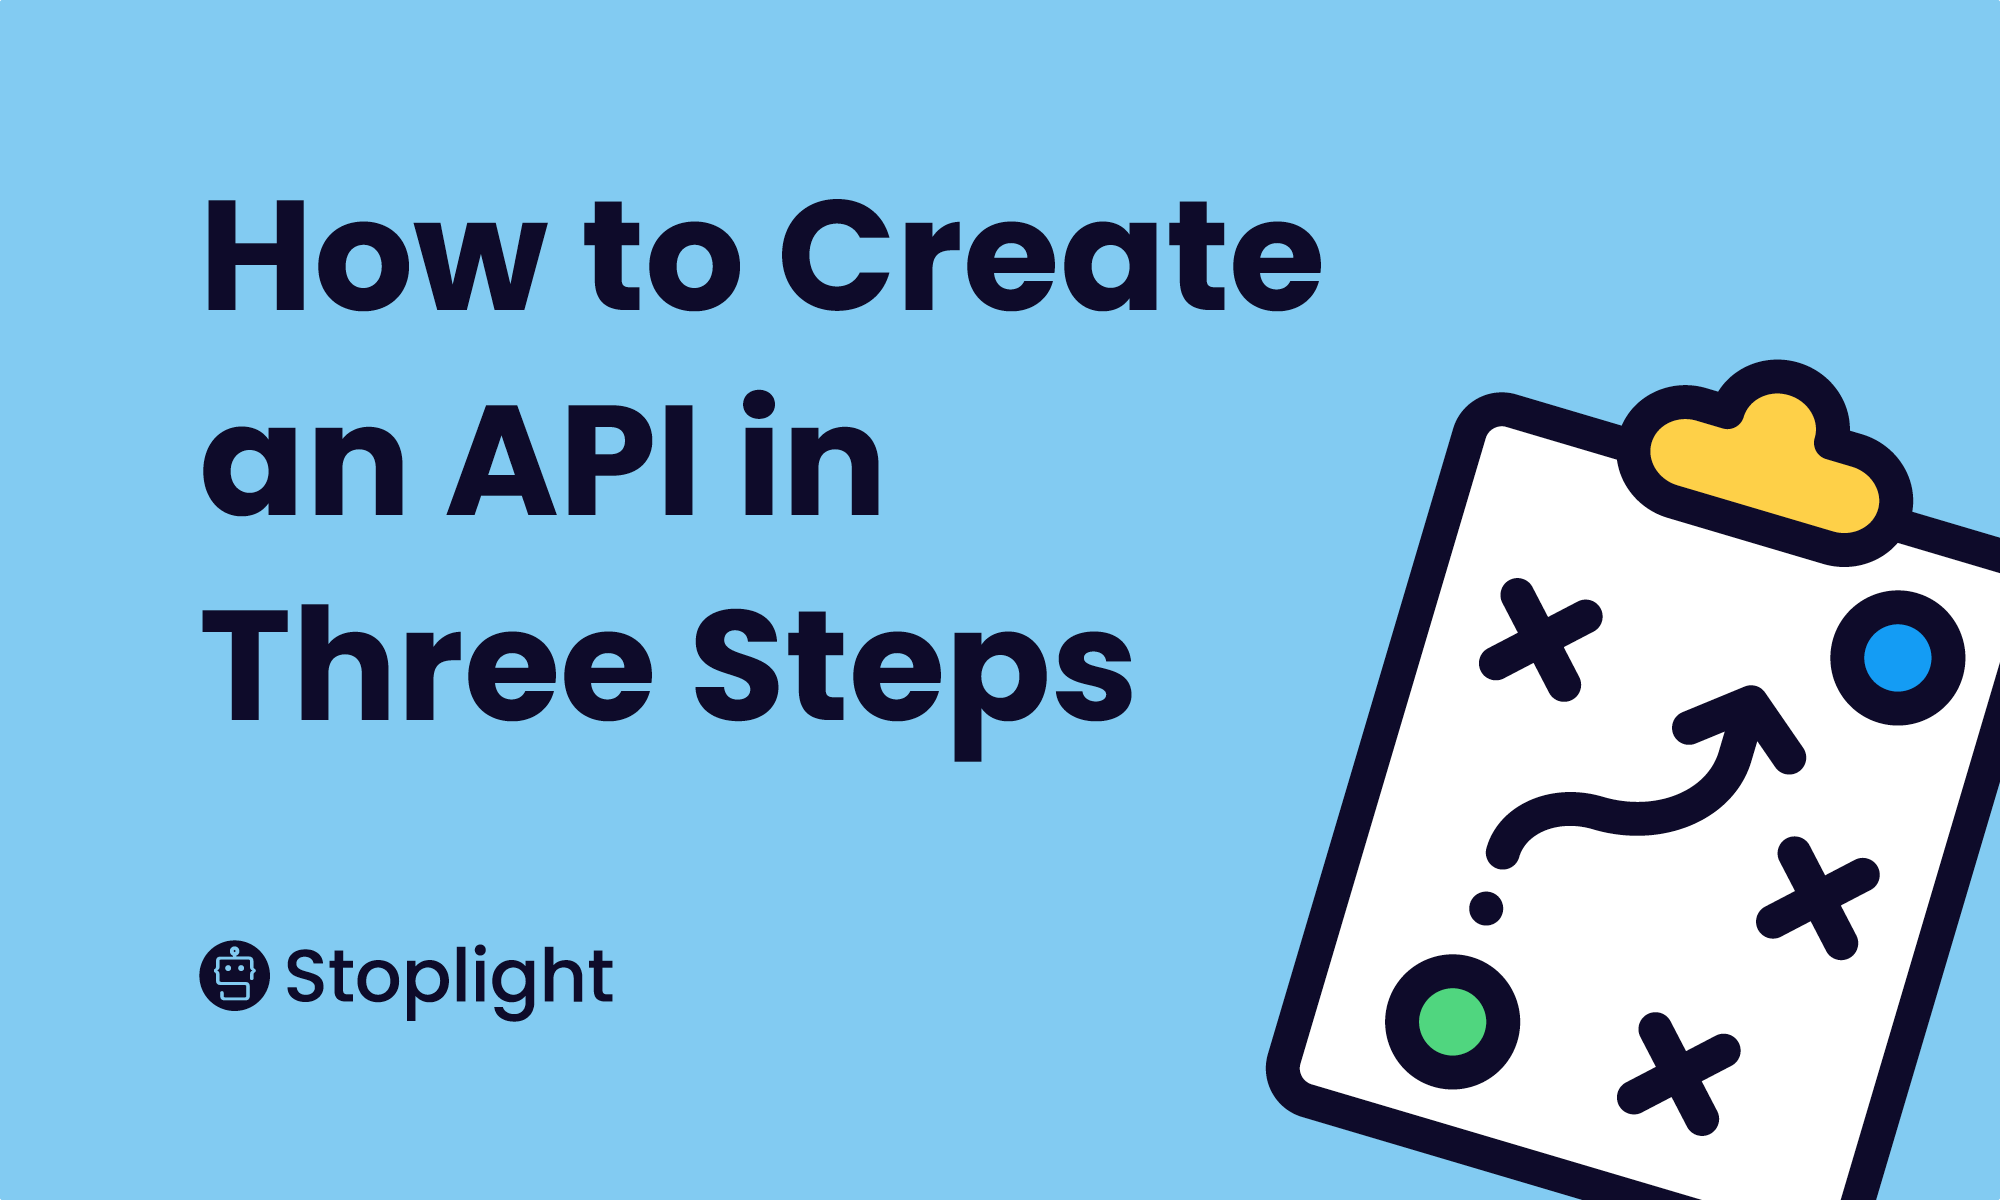 How to Create an API in Three Steps